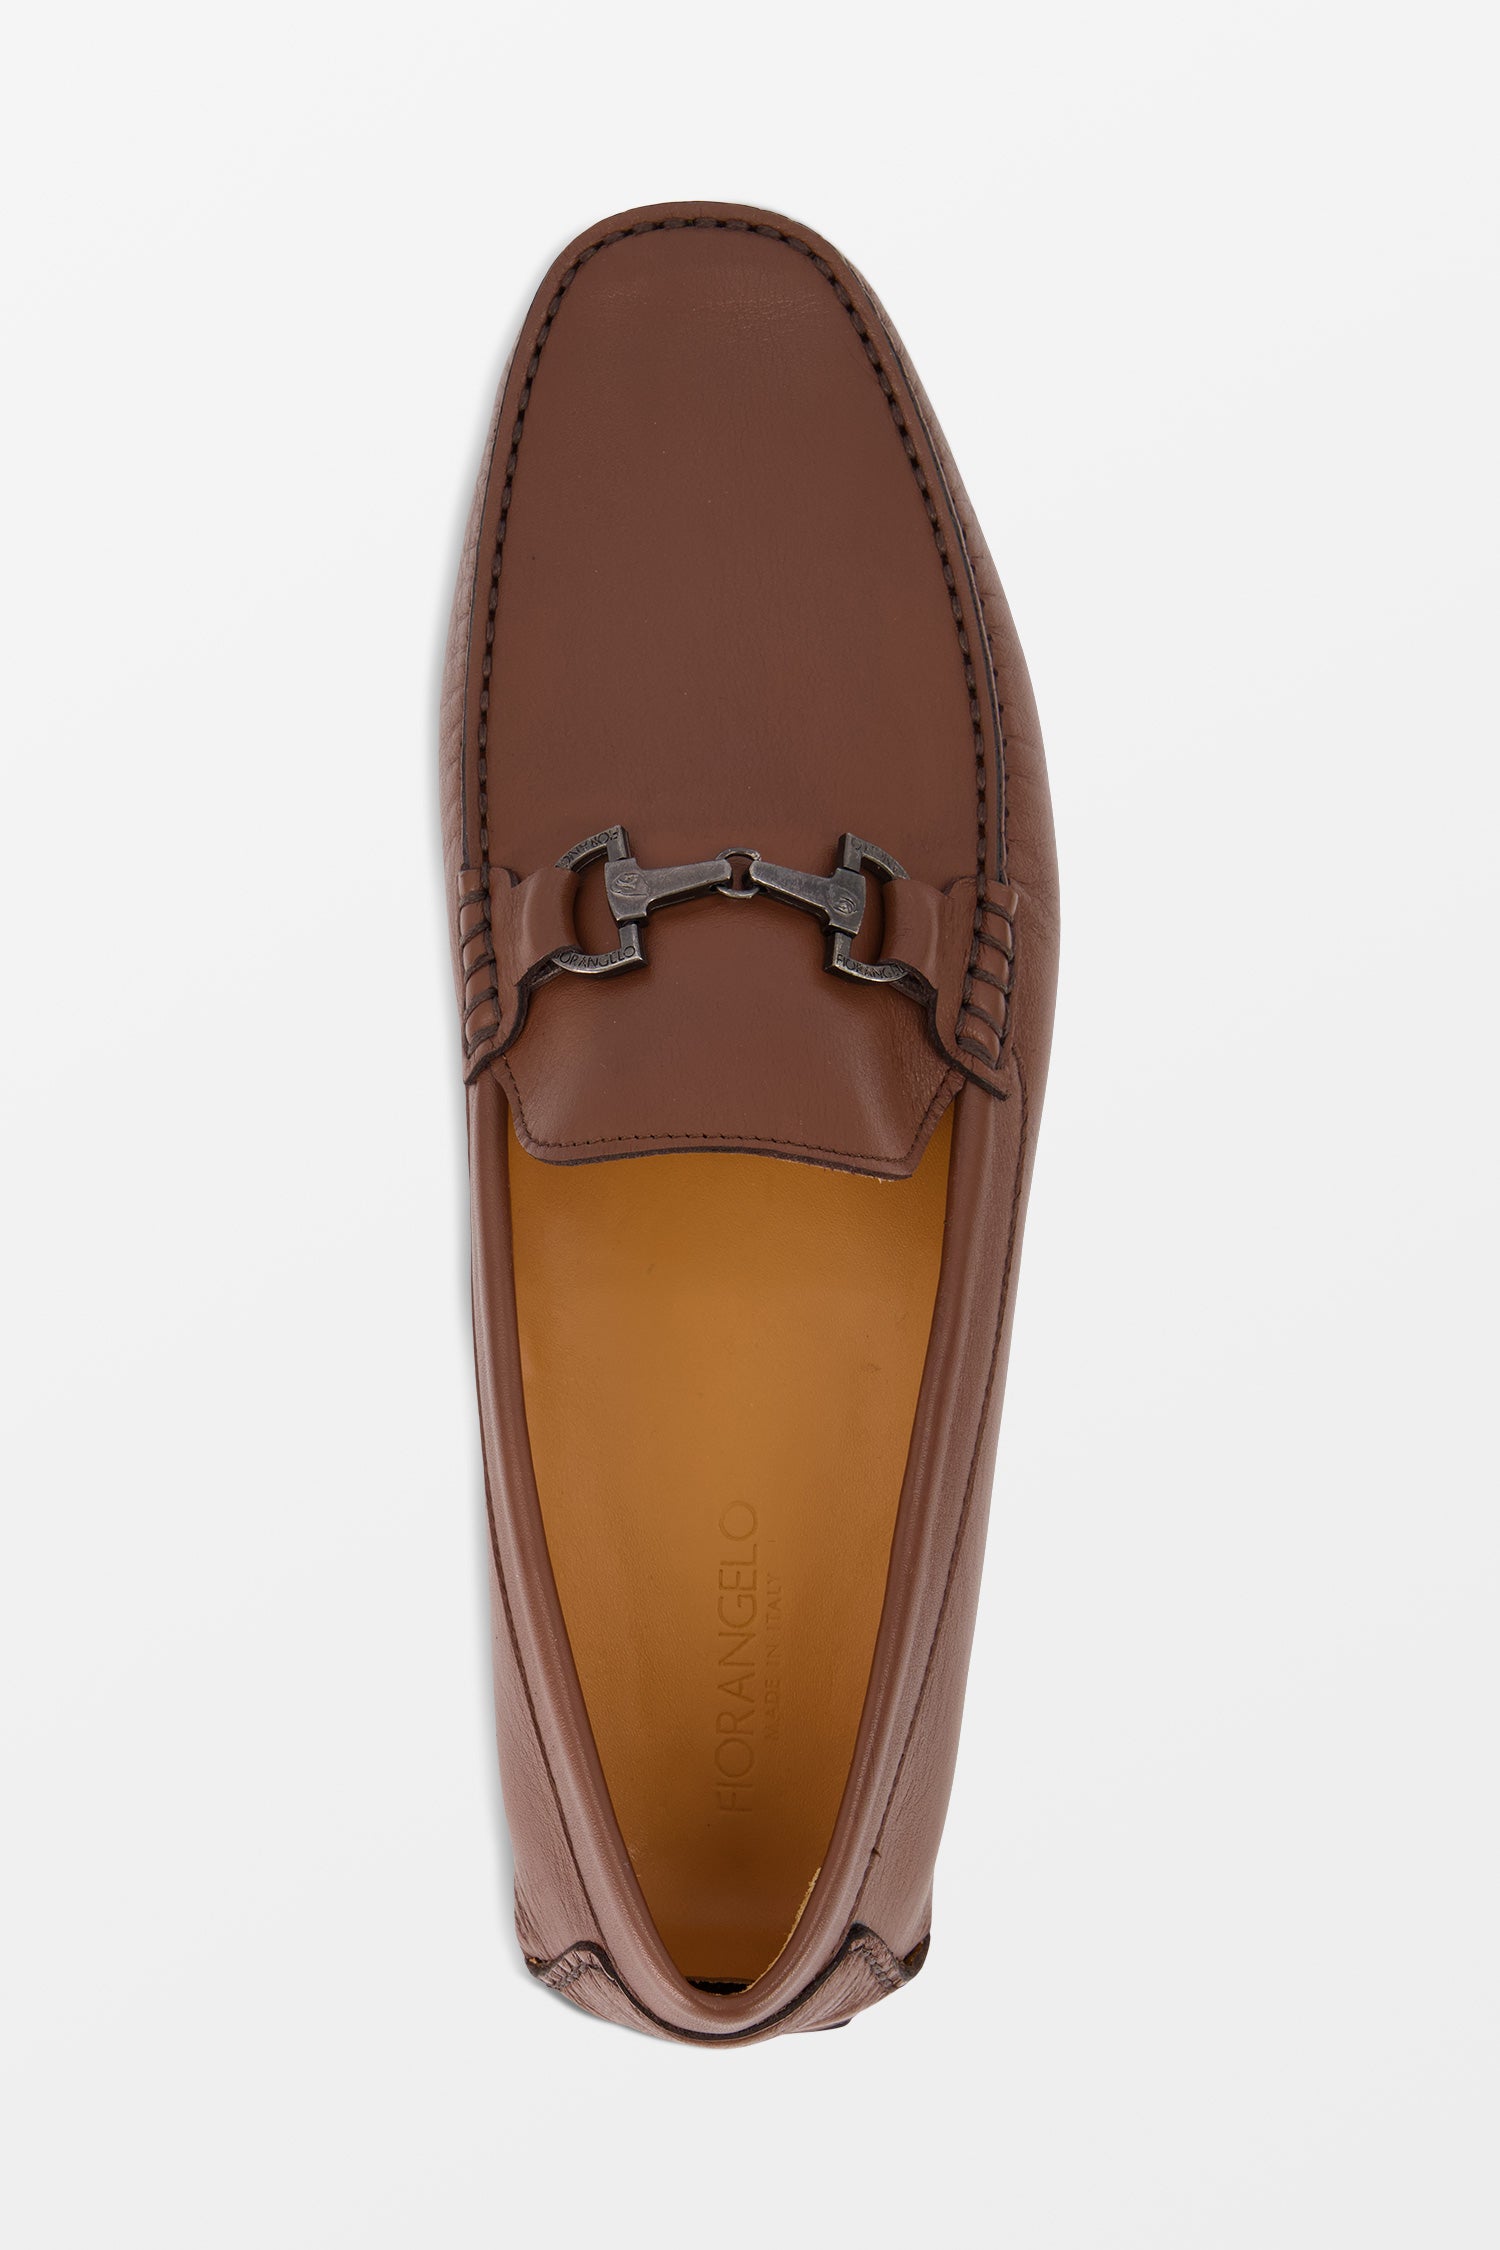 Fiorangelo Brown Leather Moccasins